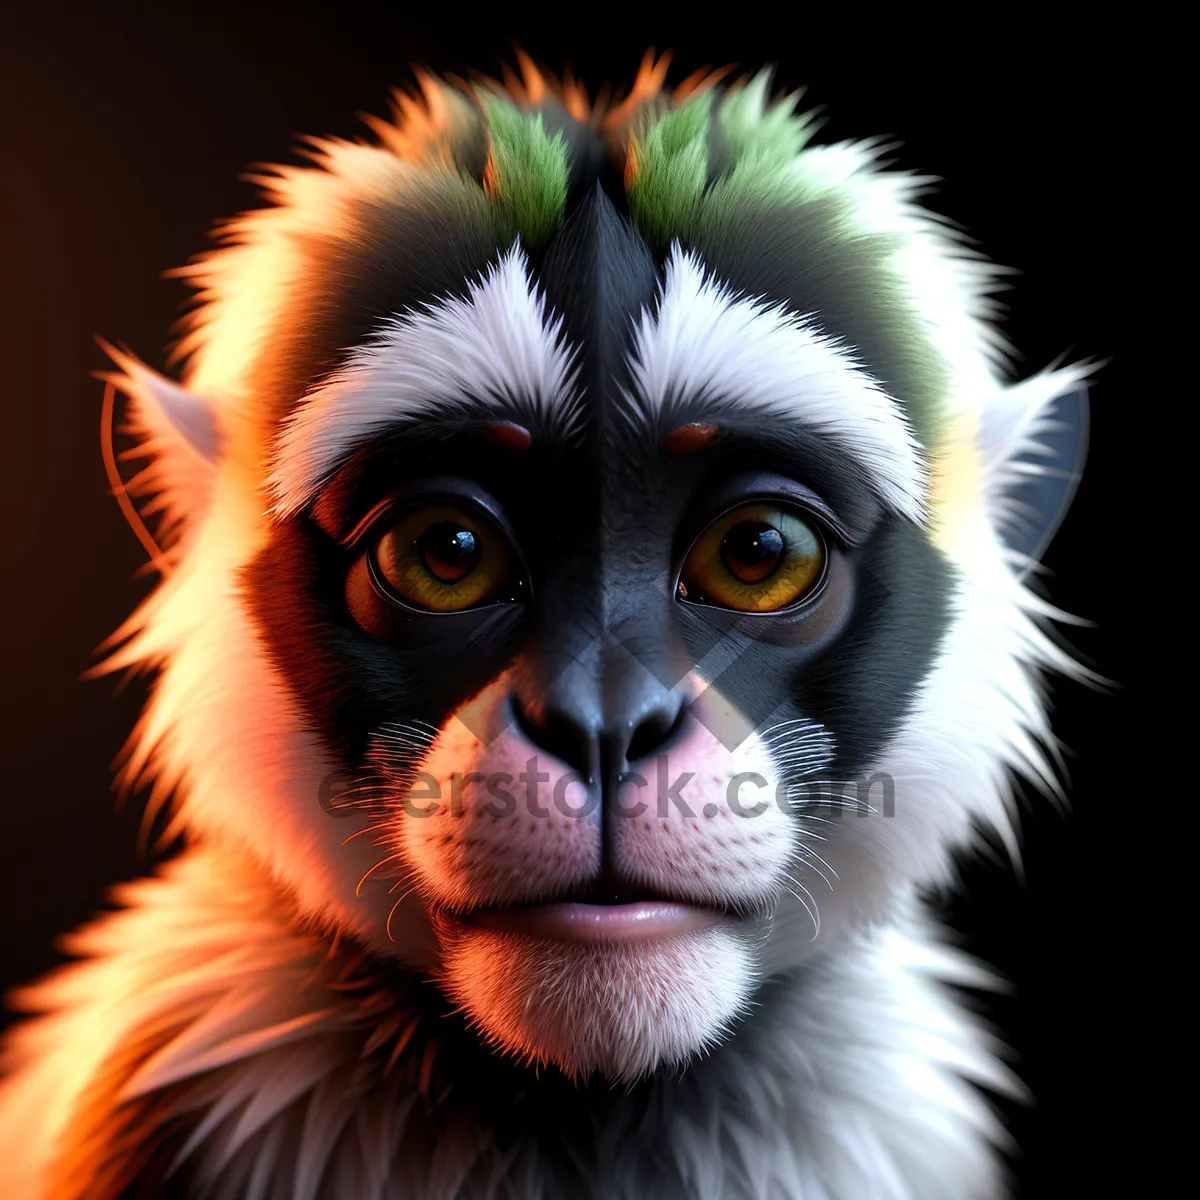 Picture of Cute Primate with Expressive Eyes